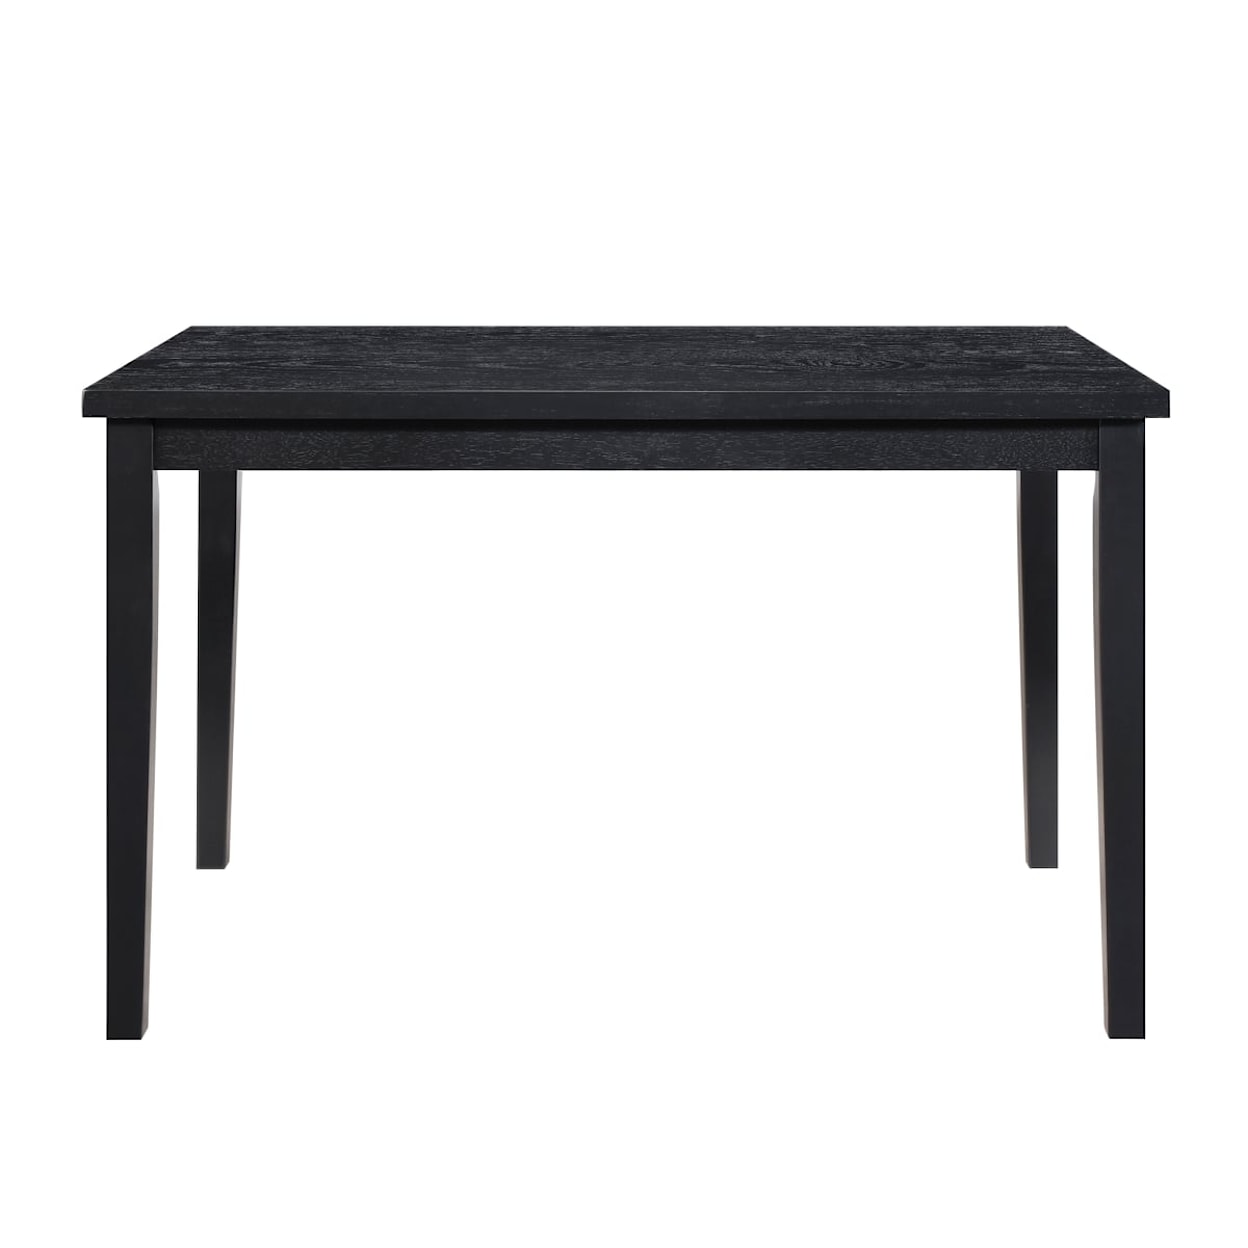 Homelegance Furniture Andreas Dining Table